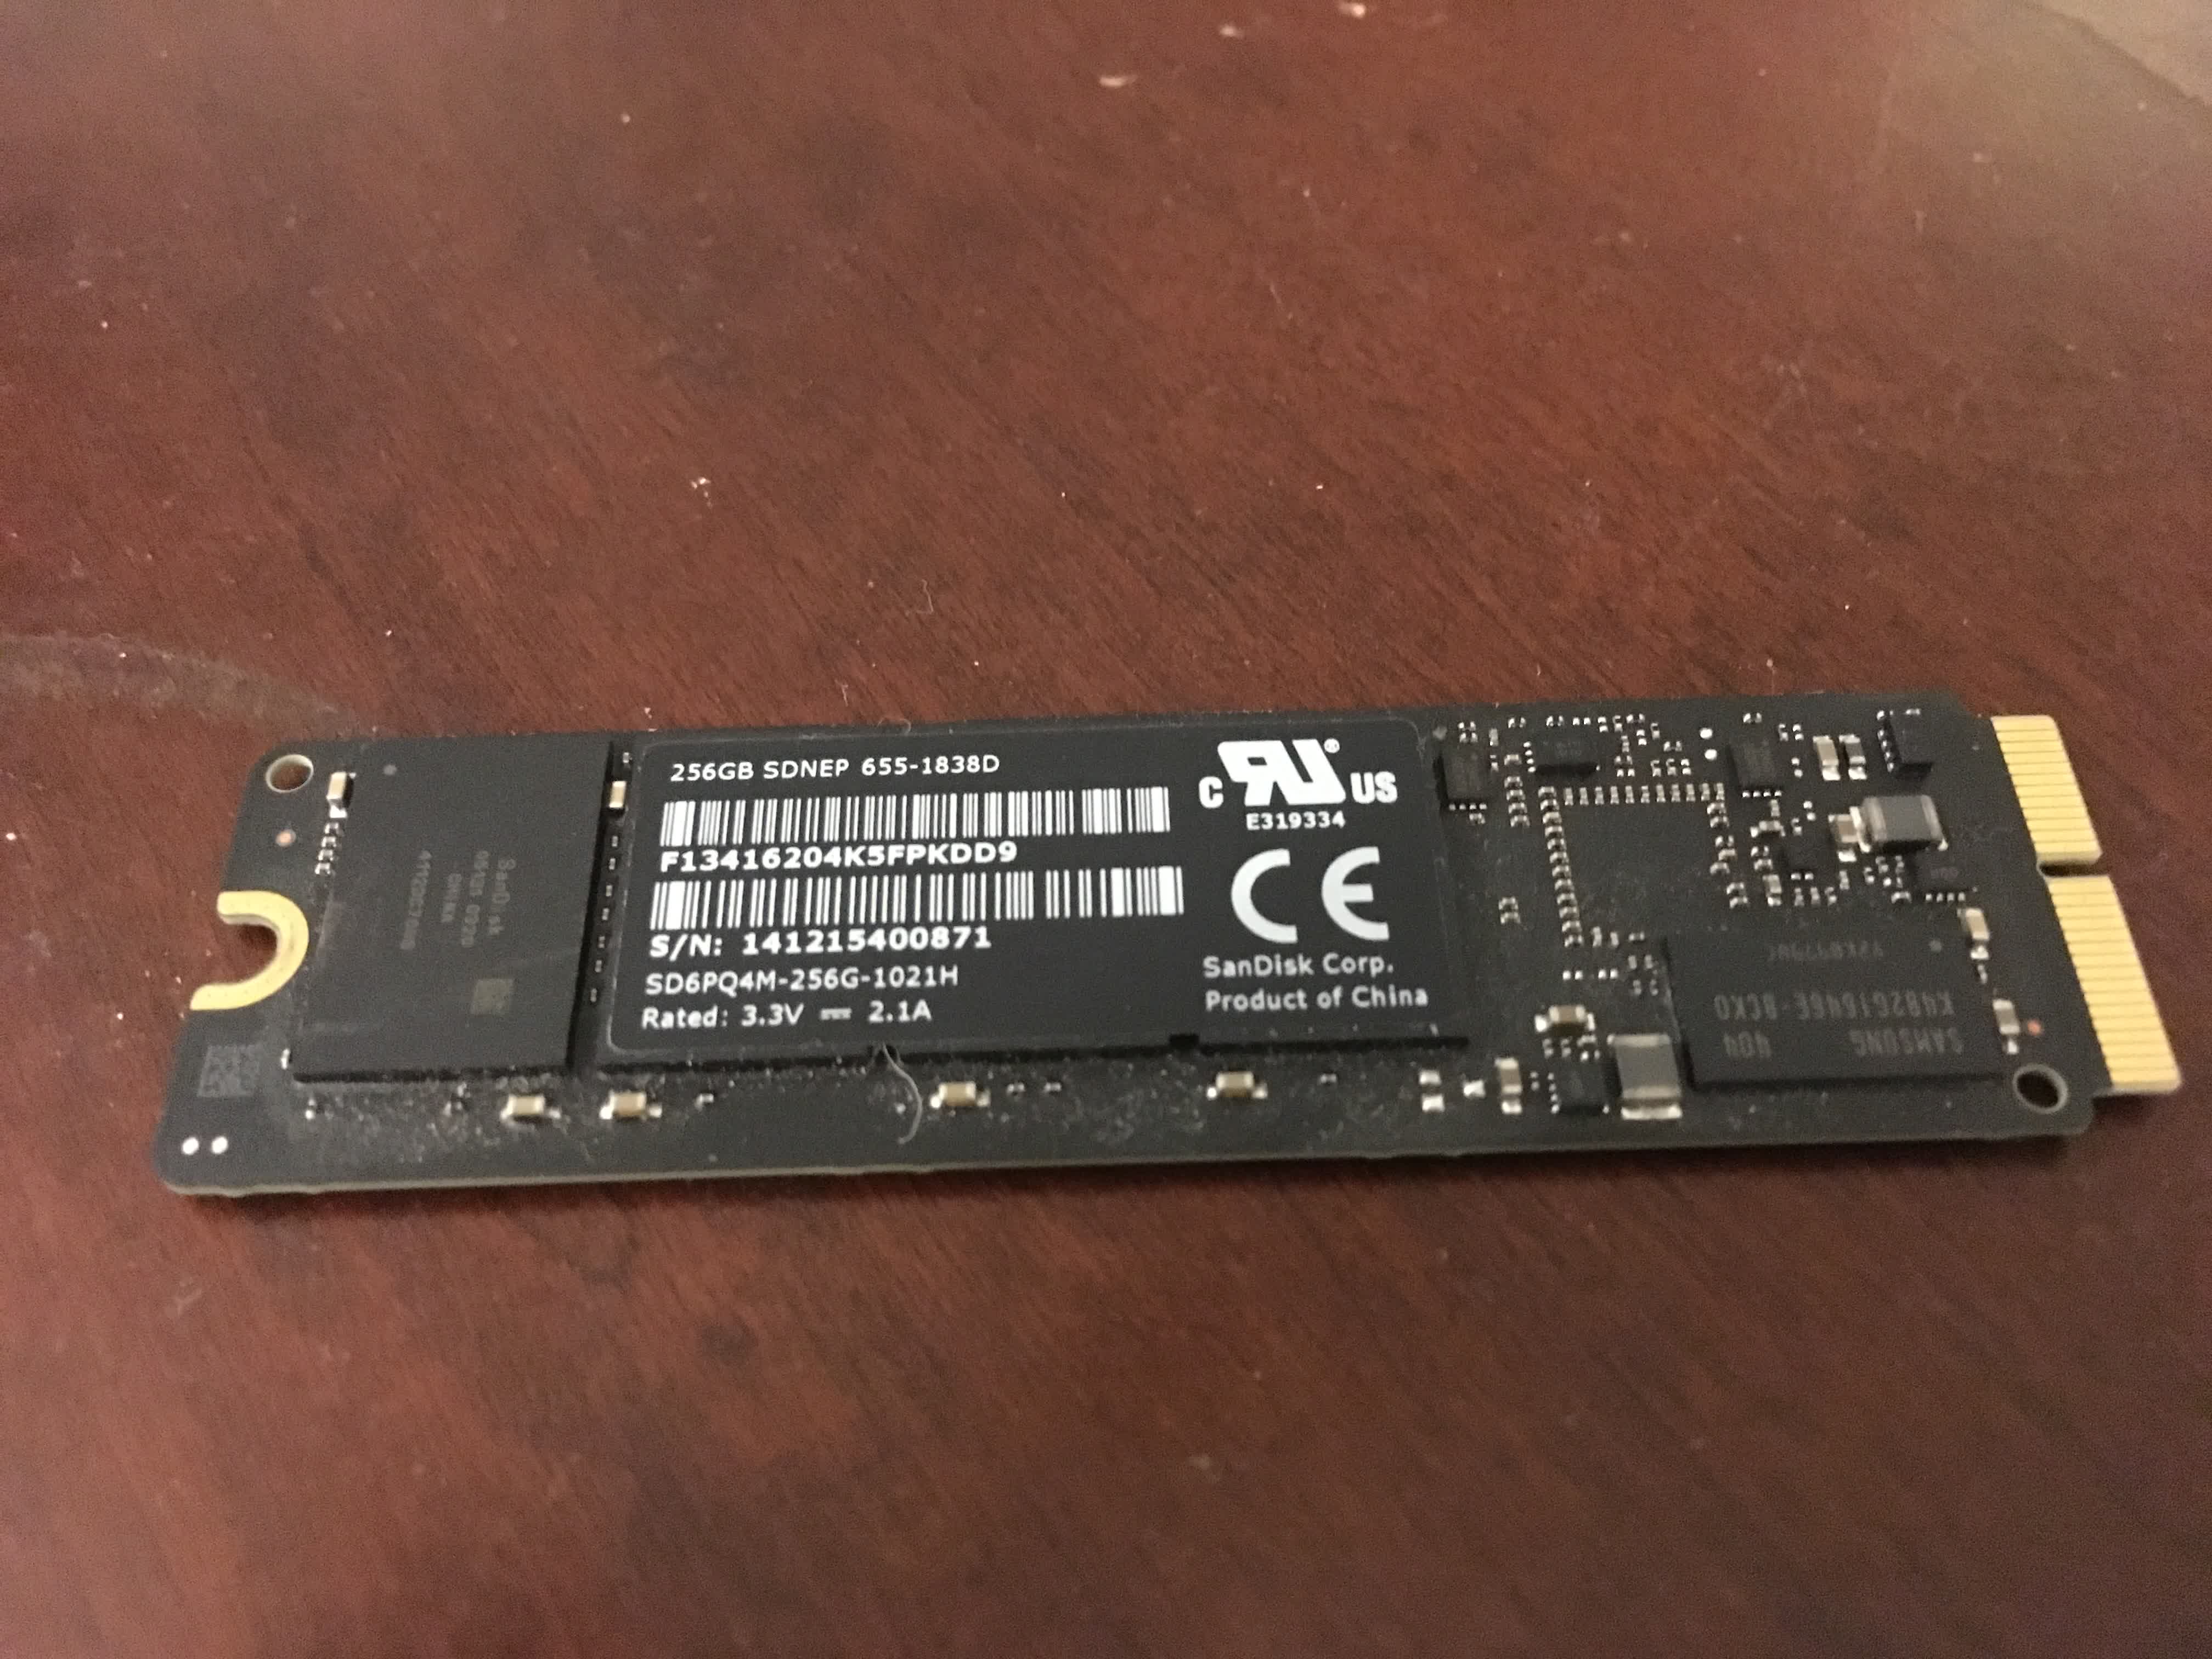 Recovering Data From a Proprietery Mac M2 SSD - Will Haley